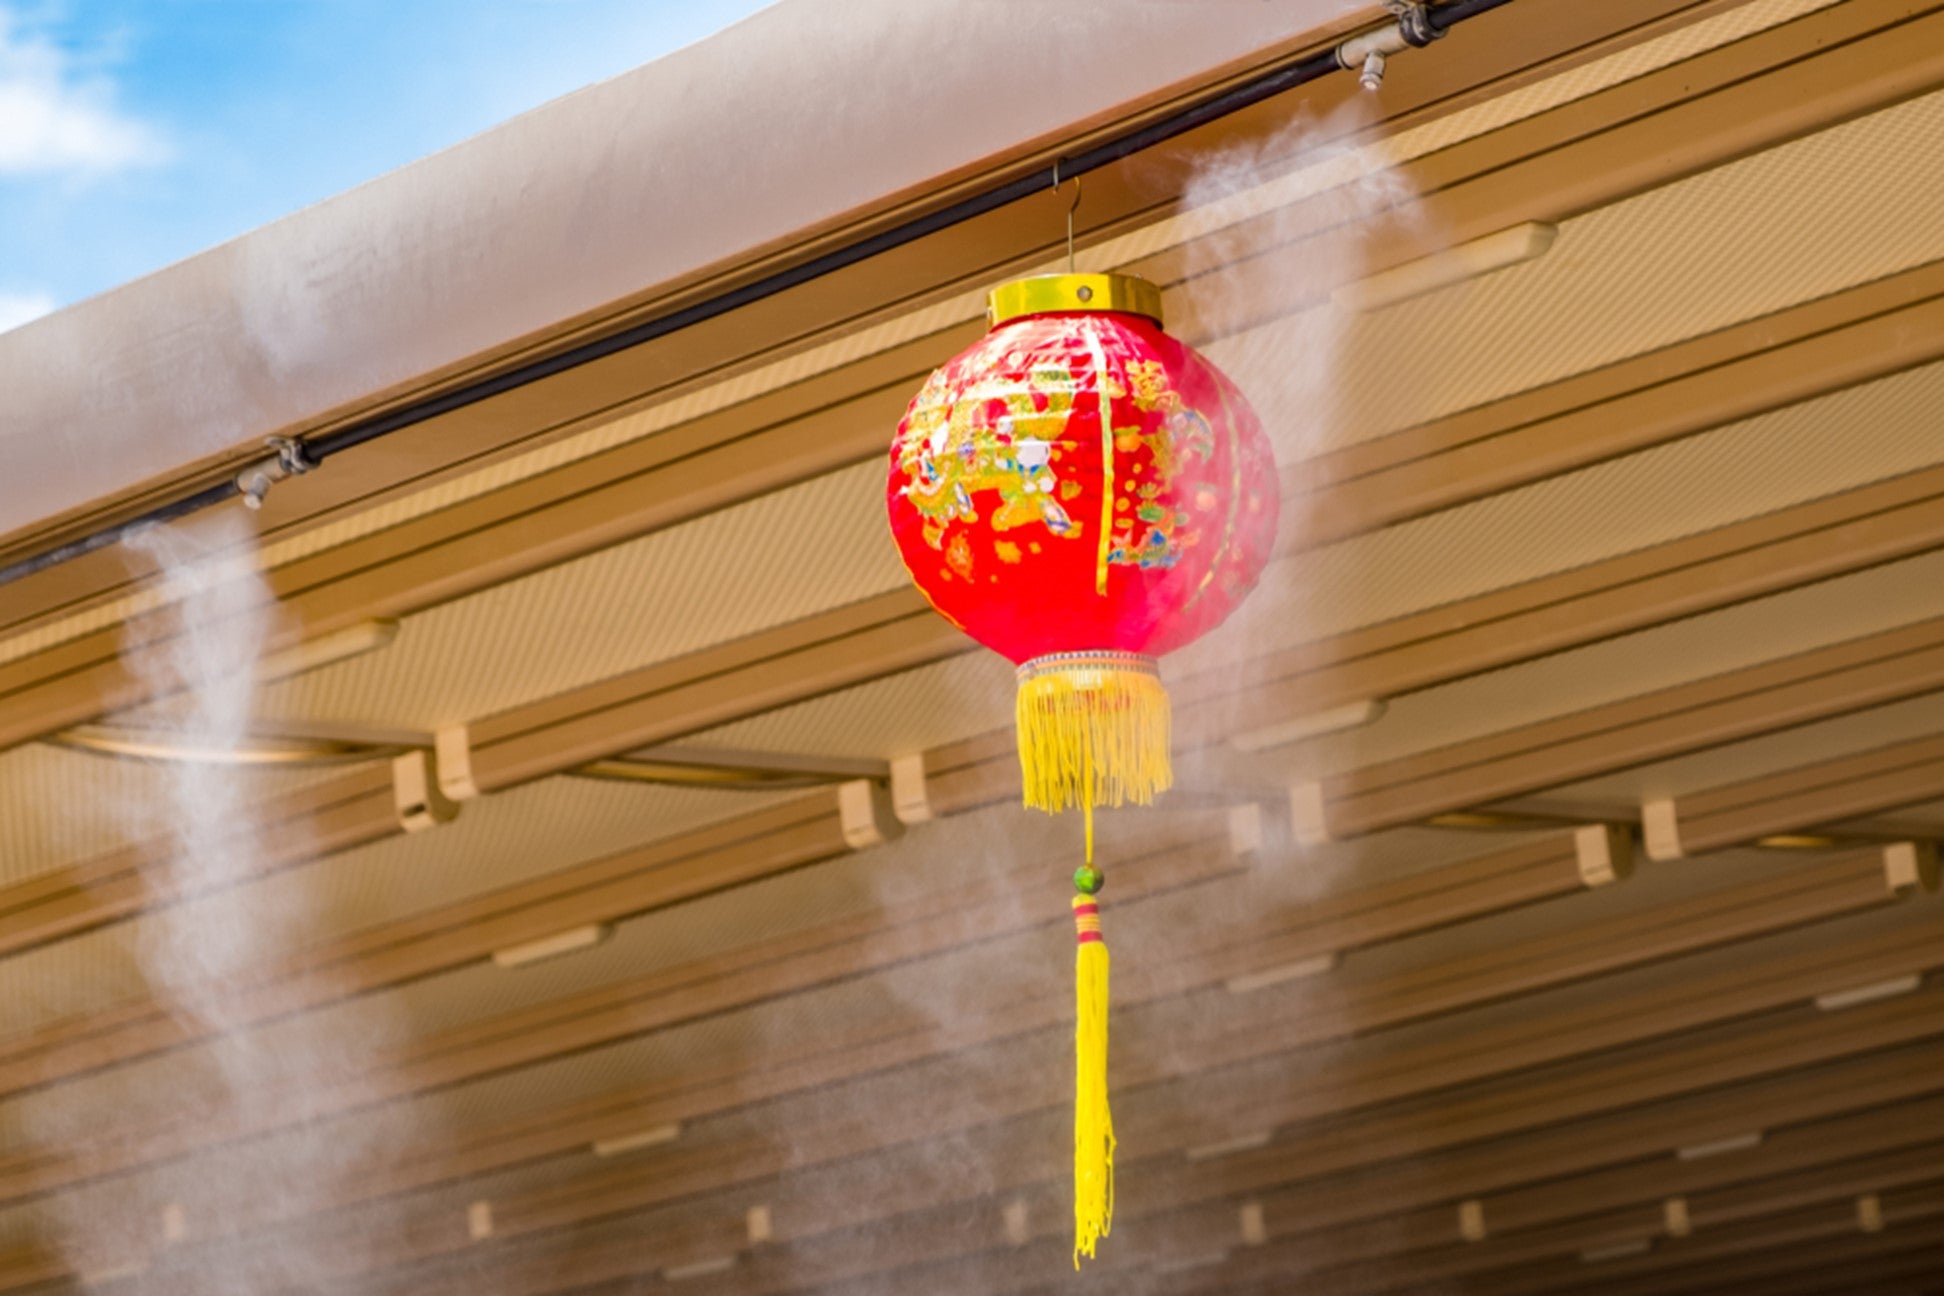 Misting system in a restaurant